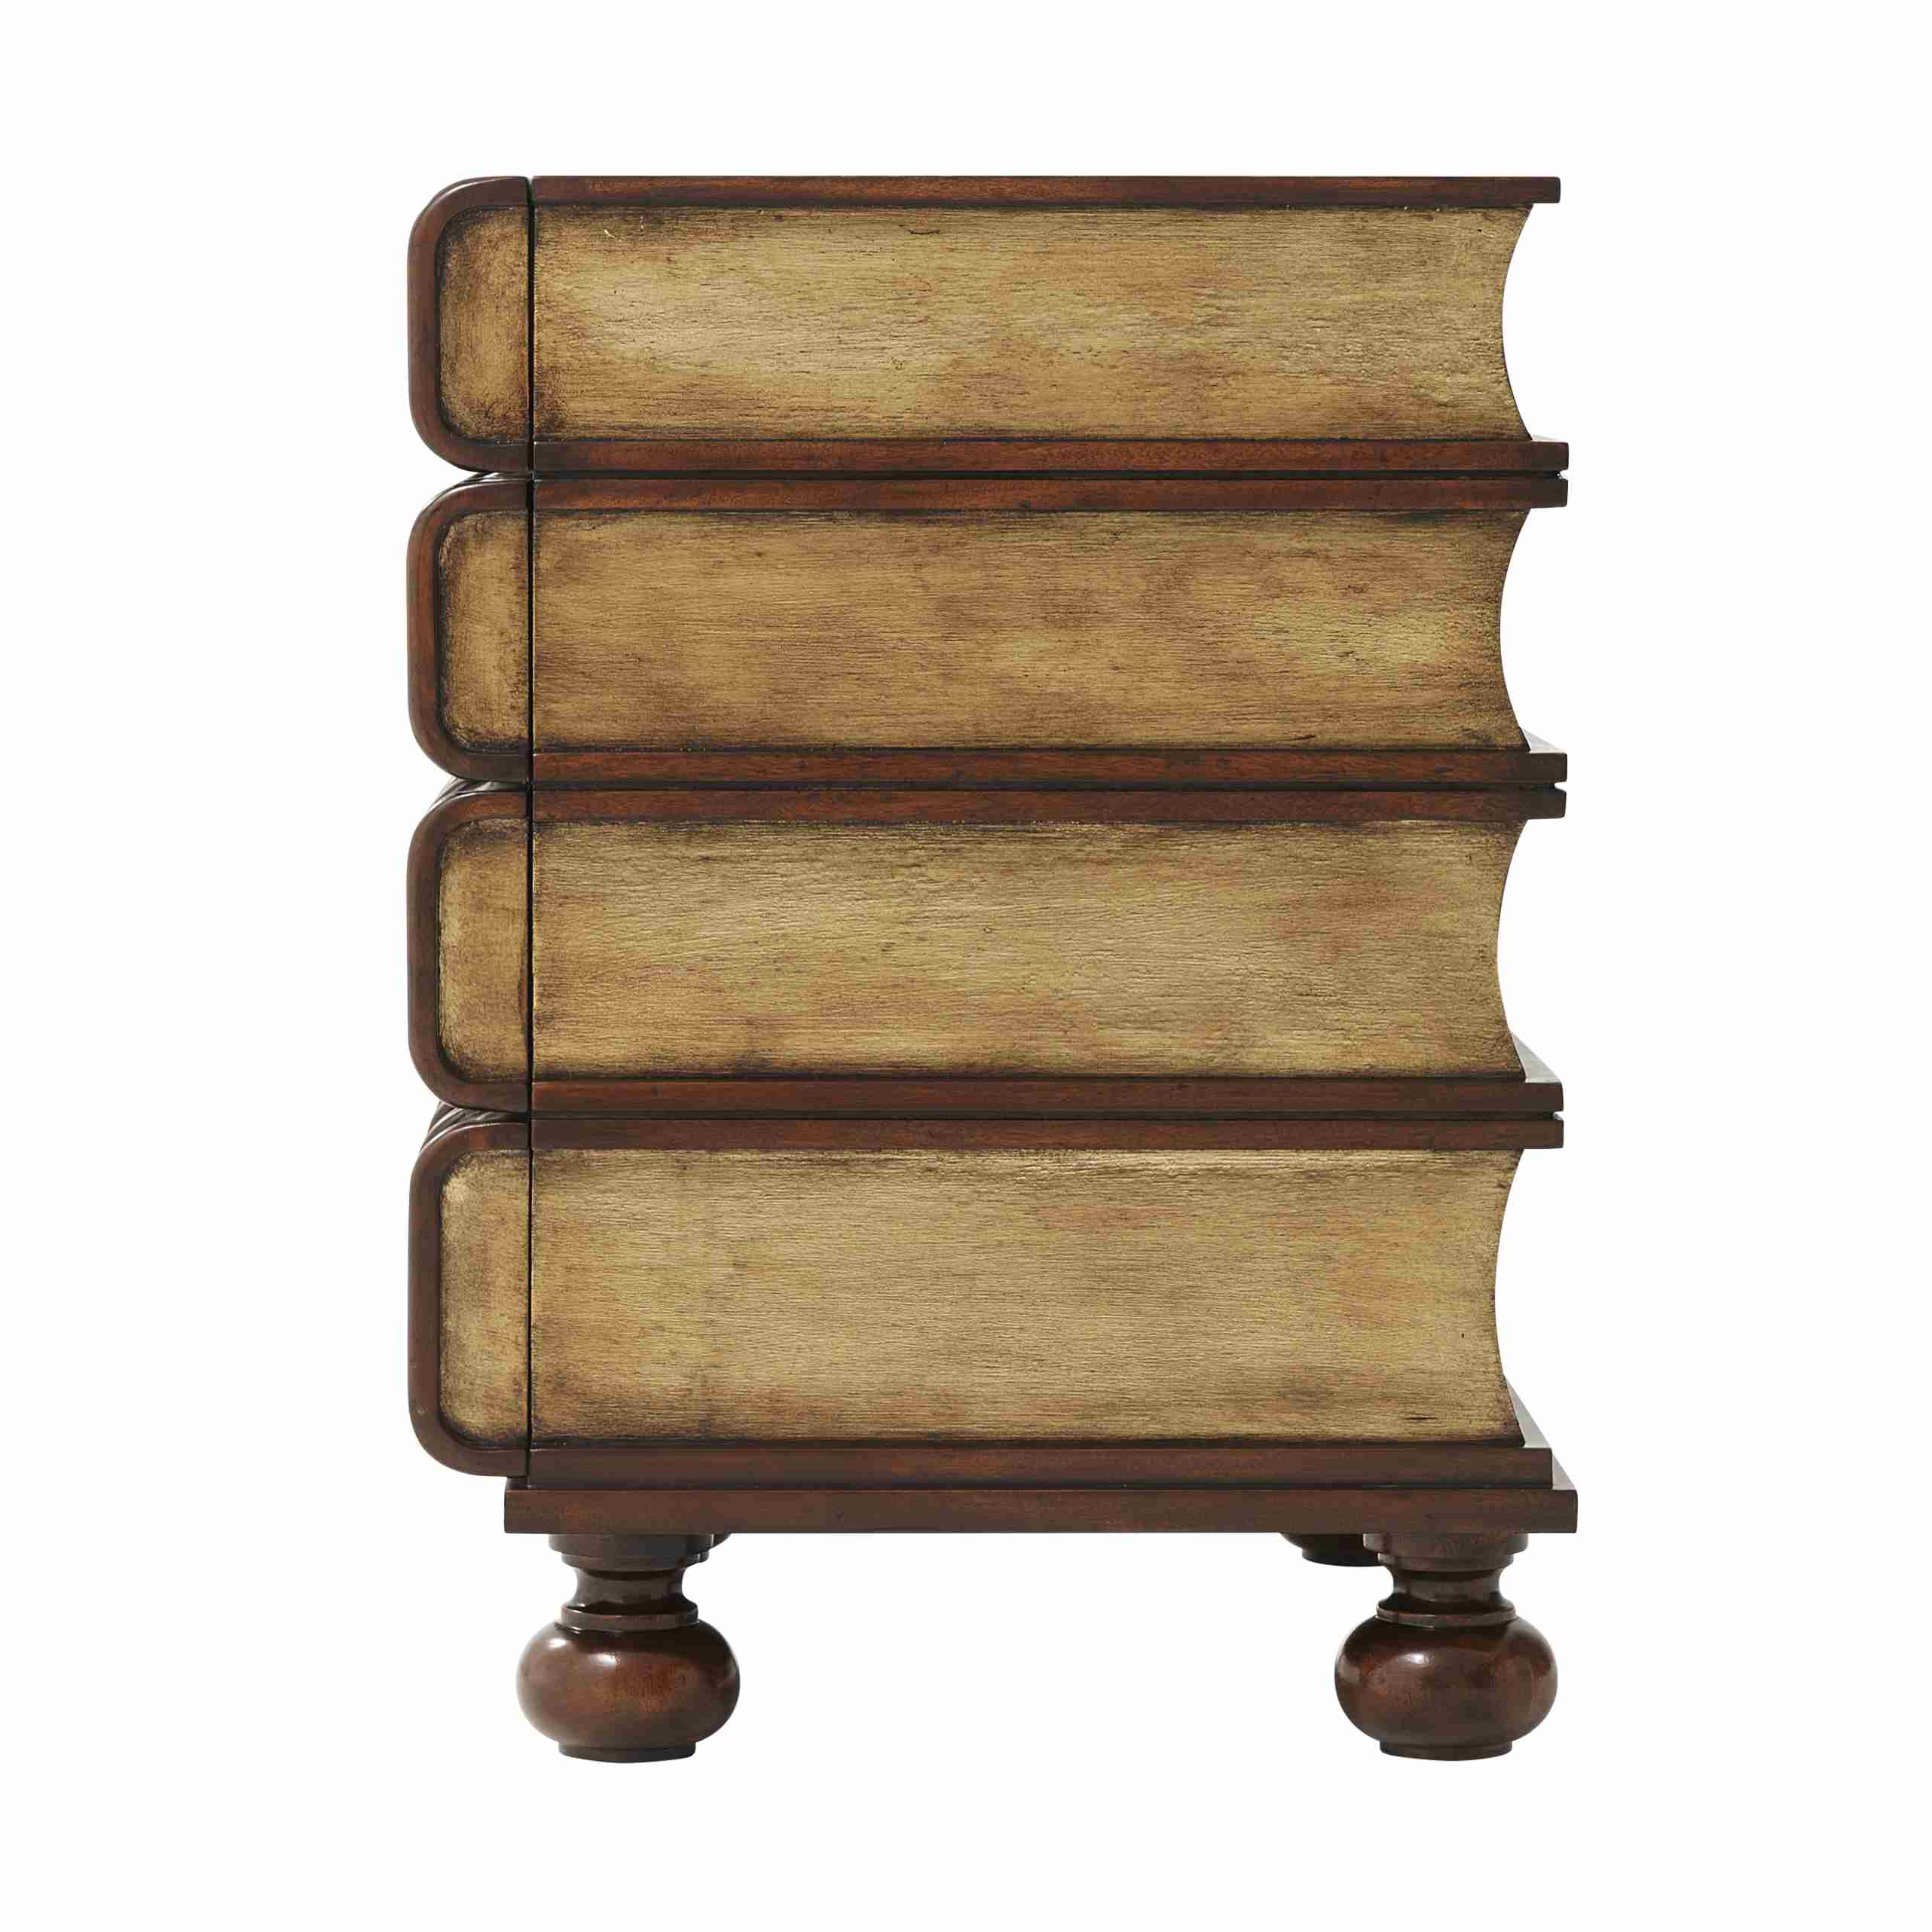 HAND CARVED AND GILT FAUX BOOK NIGHTSTAND